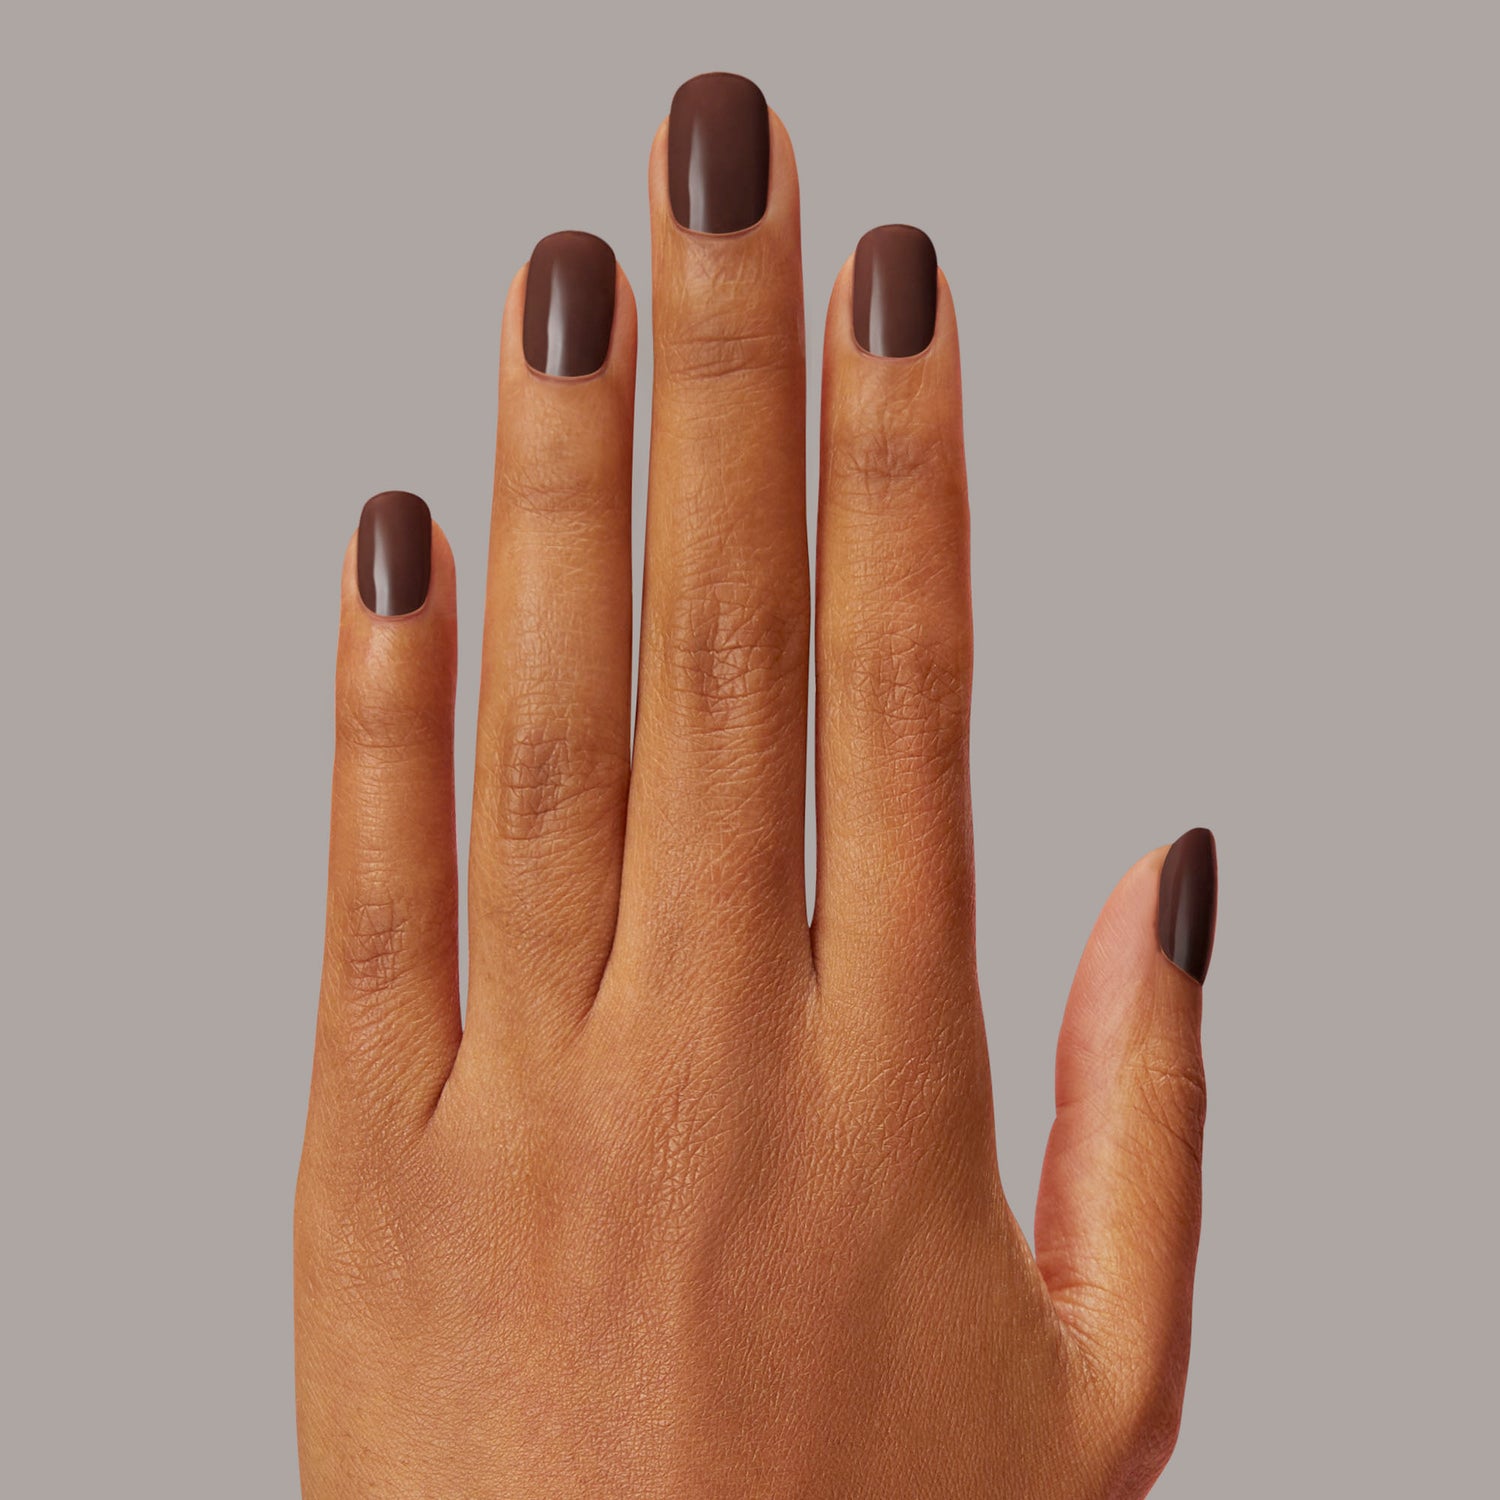 Semi-cured, rich dark brown gel nail strips with mega volume & an opaque finish.